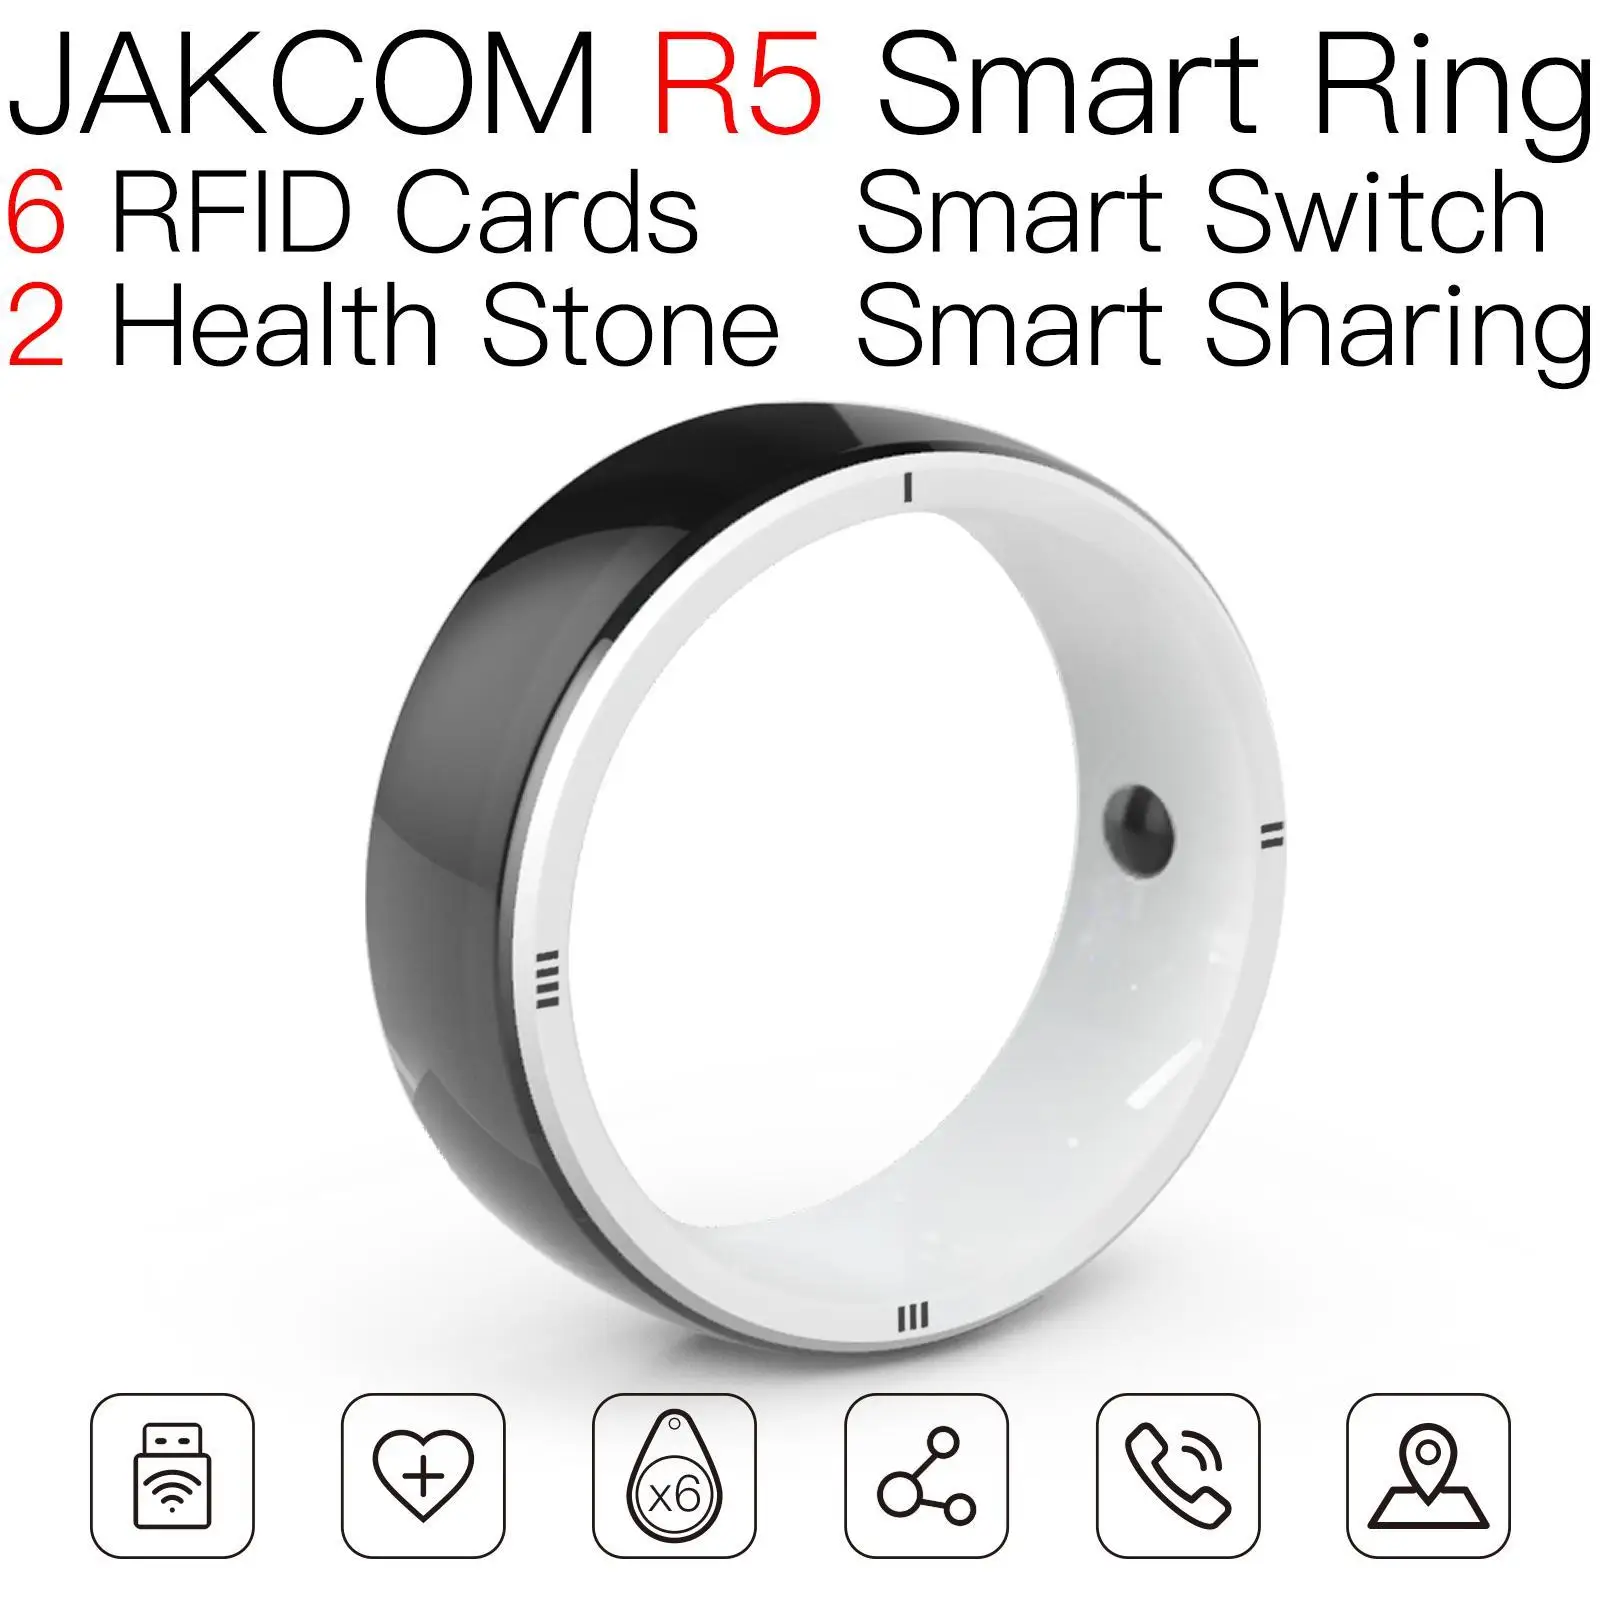 

JAKCOM R5 Smart Ring Super value than carte pvc chip passive 3d system nfc business card printable rfid inlay 9662 block sleeve